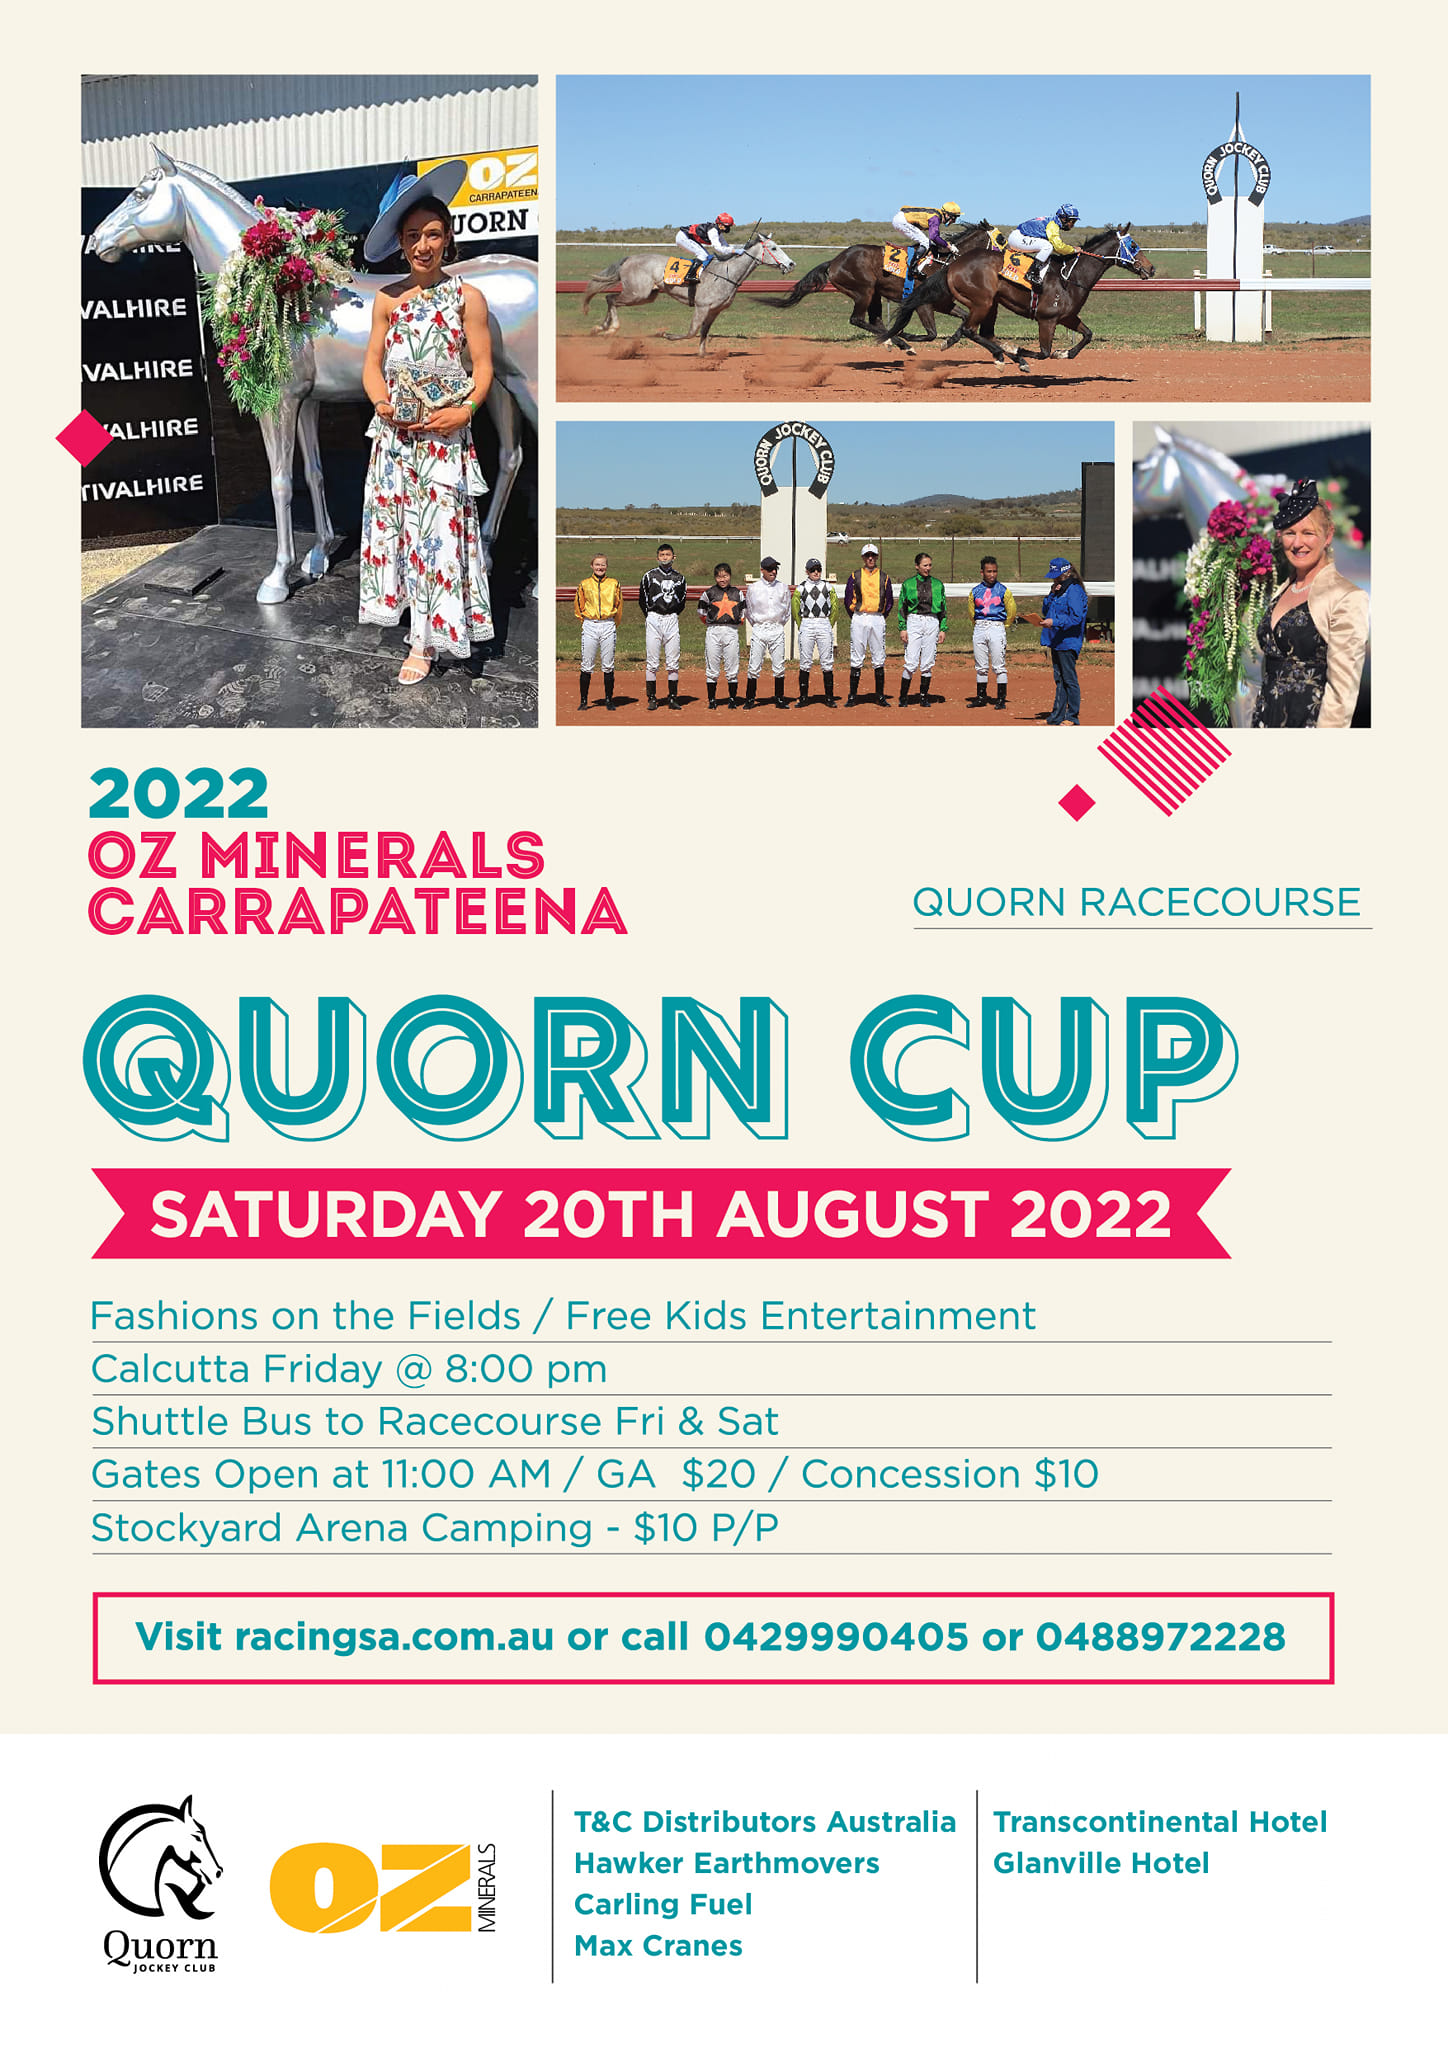 2022 Quorn Cup info